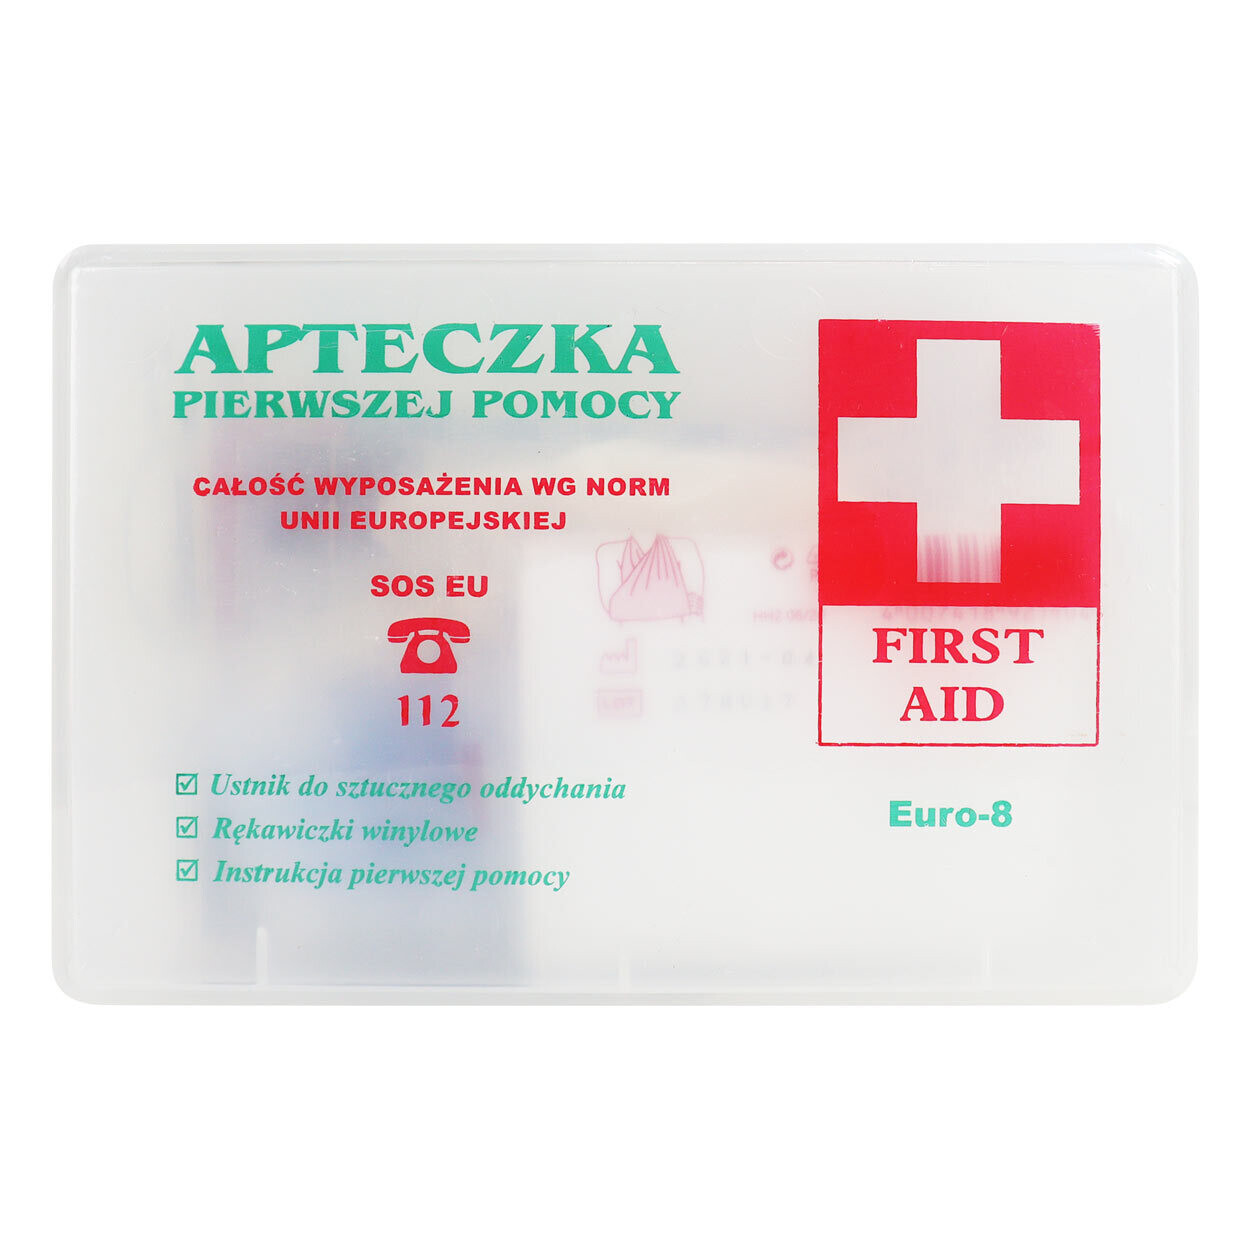 DIN 13164 first aid kit